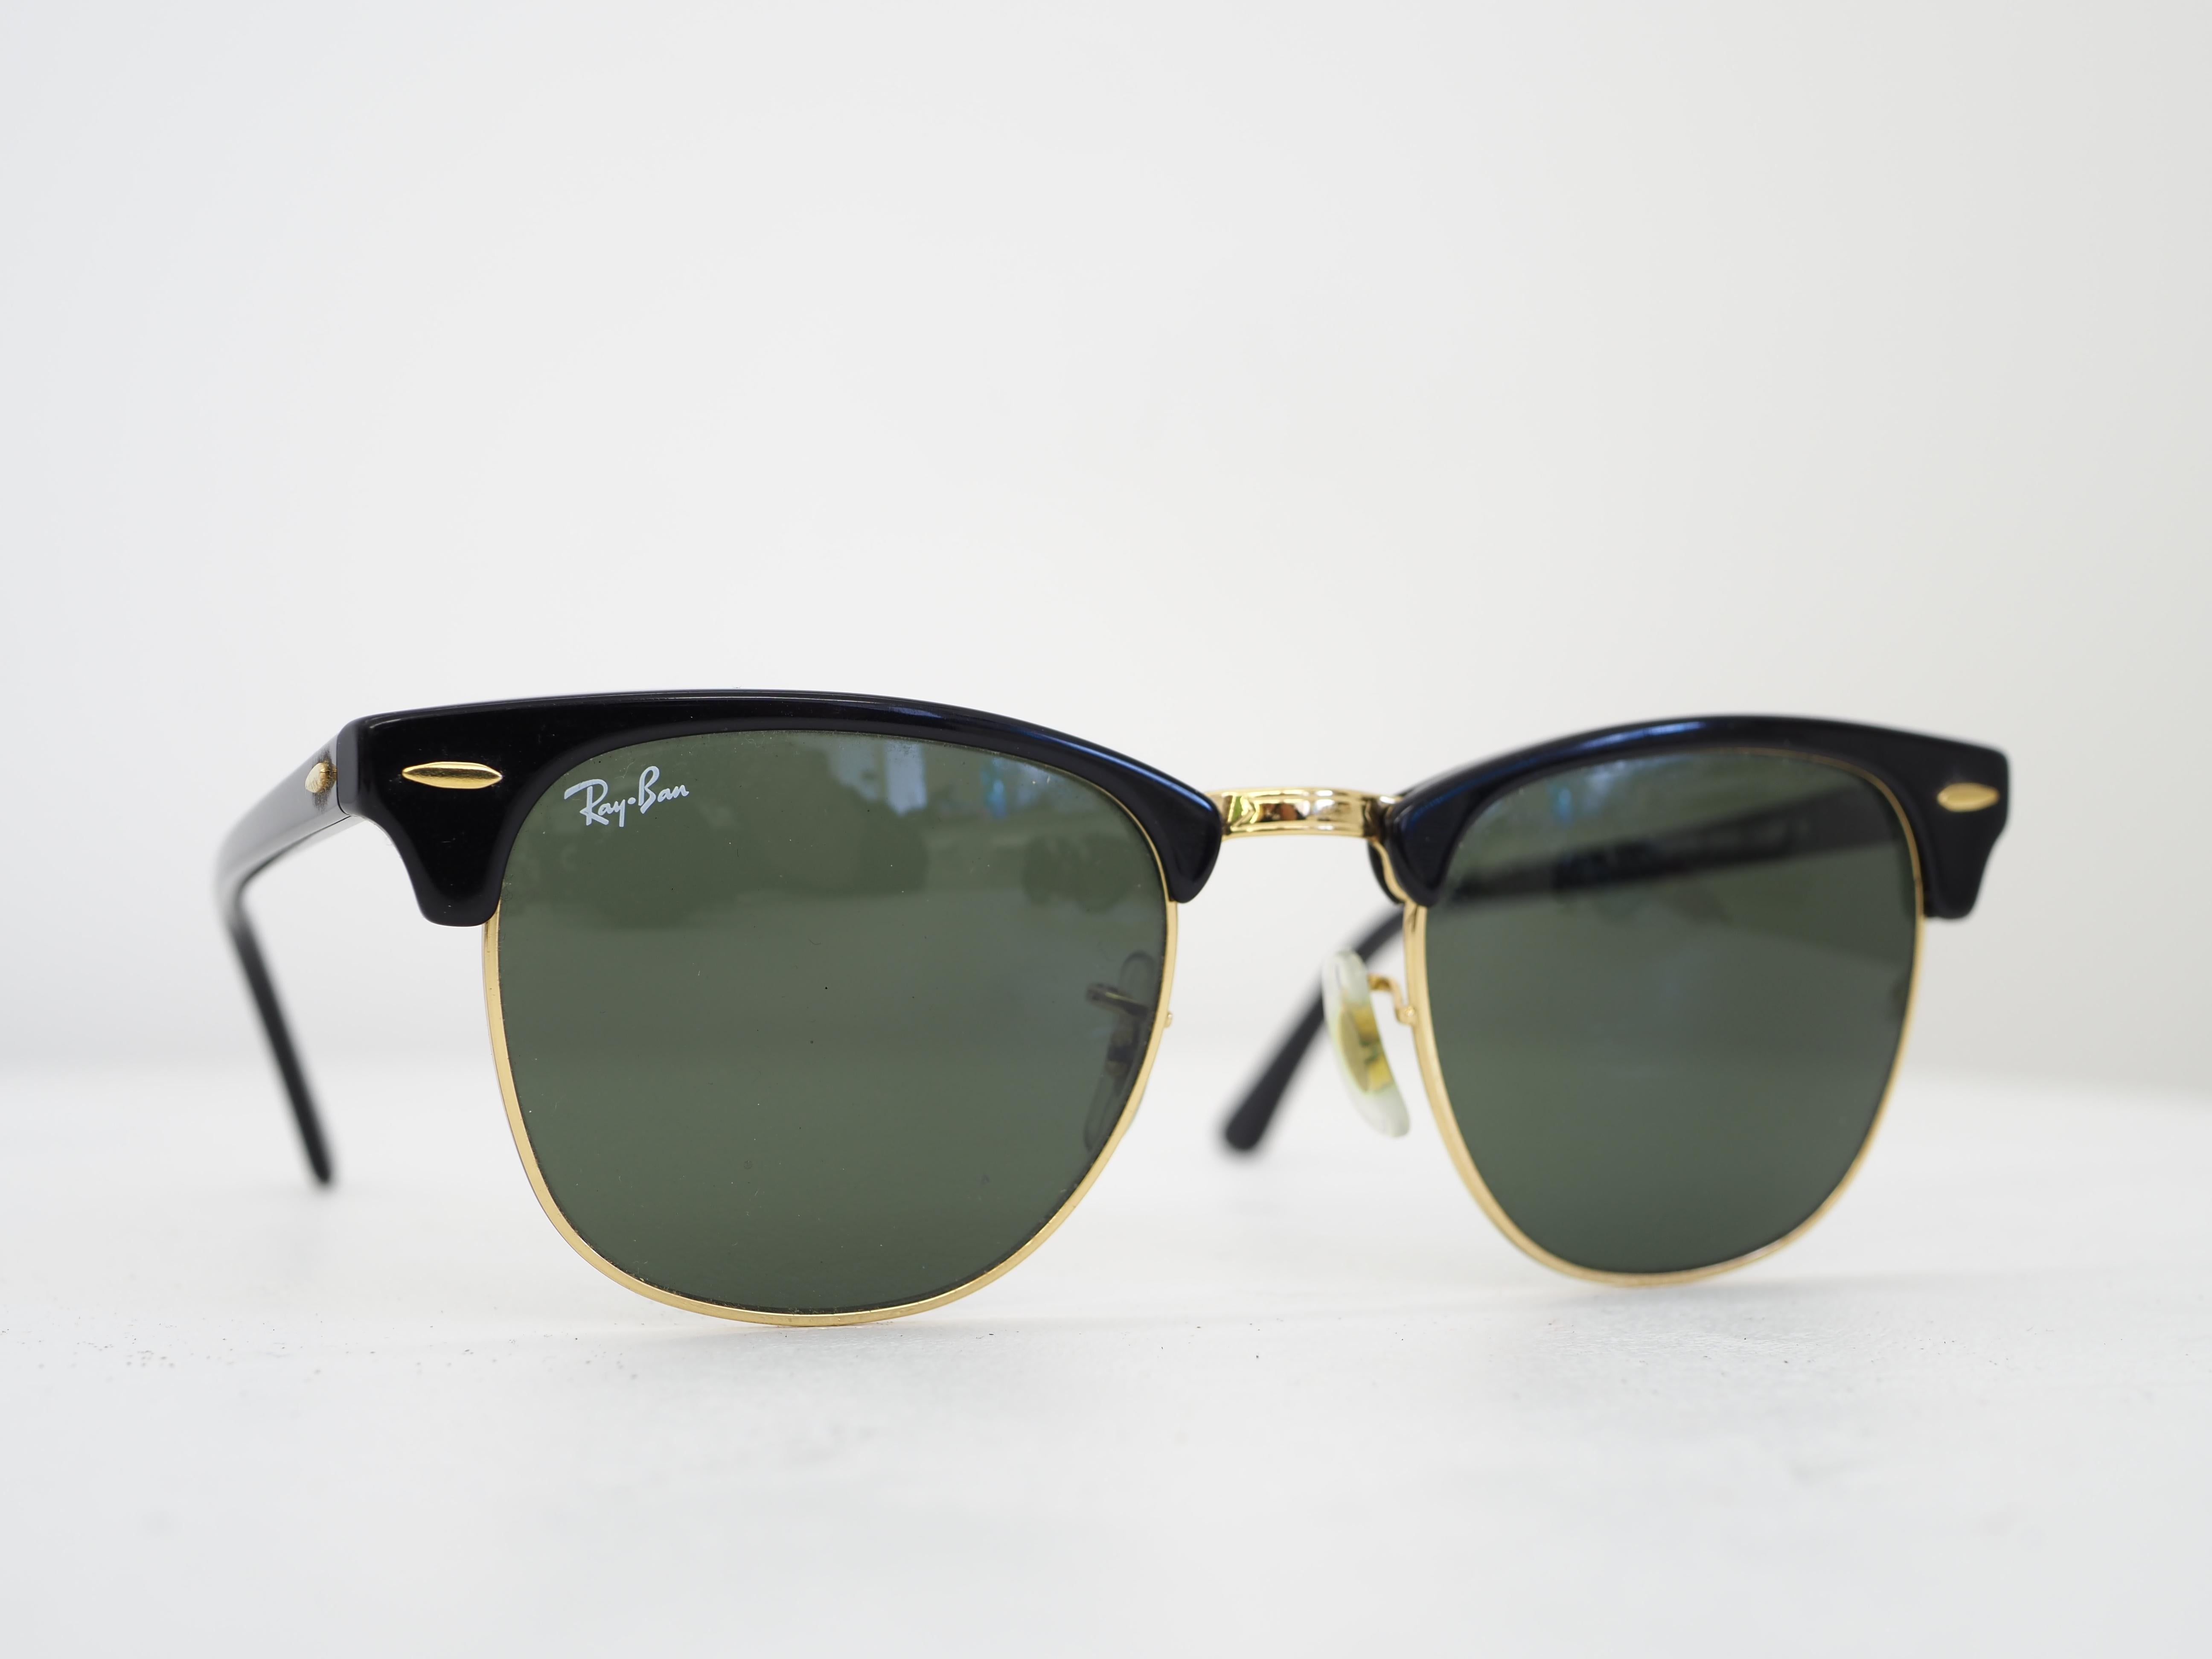 Gray Ray-Ban black gold sunglasses For Sale